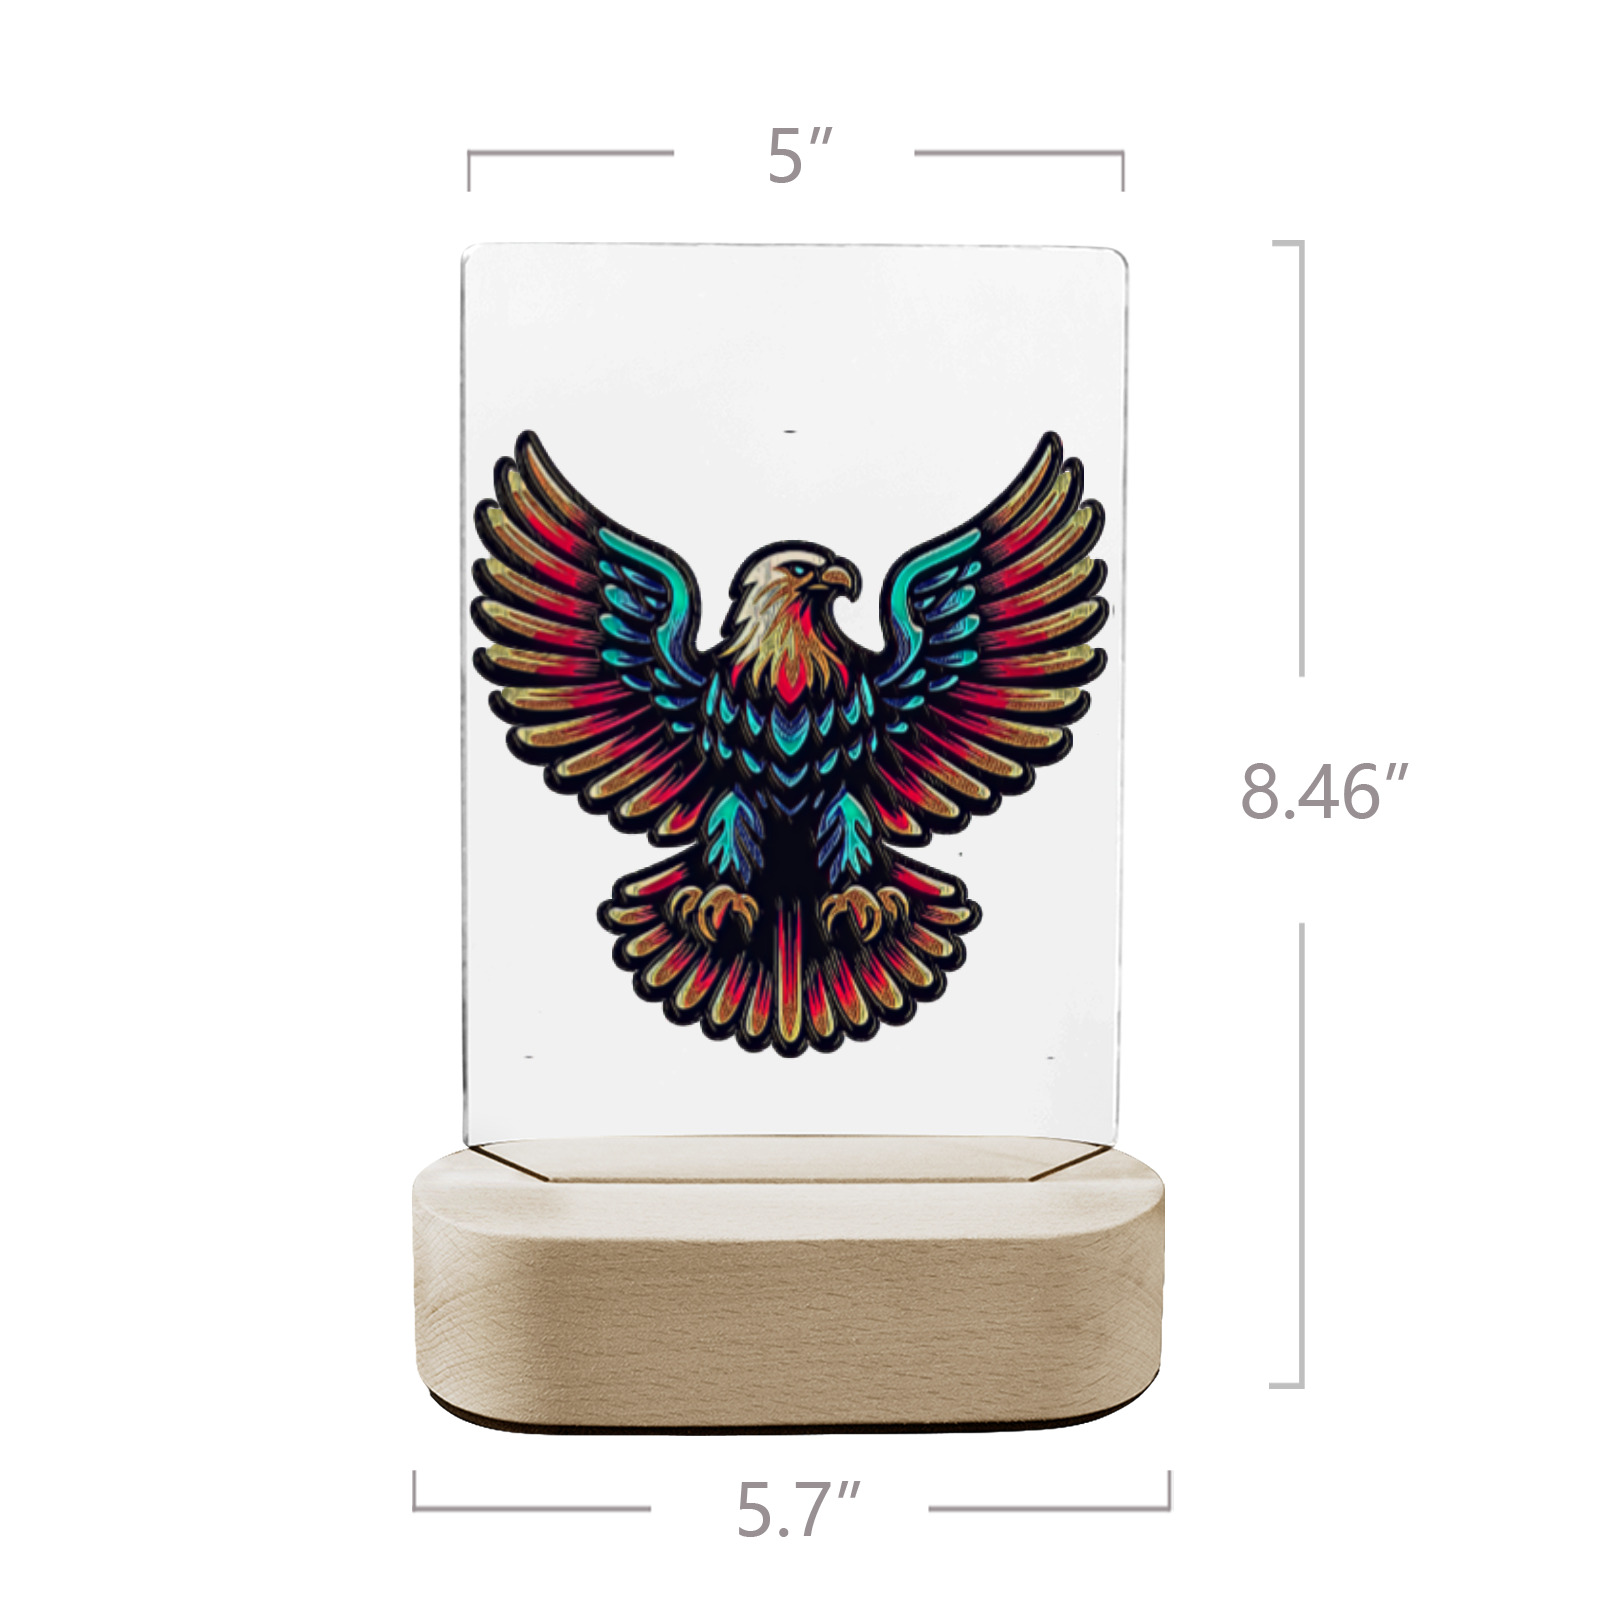 402 American Eagle Acrylic Photo Print with Wooden Stand